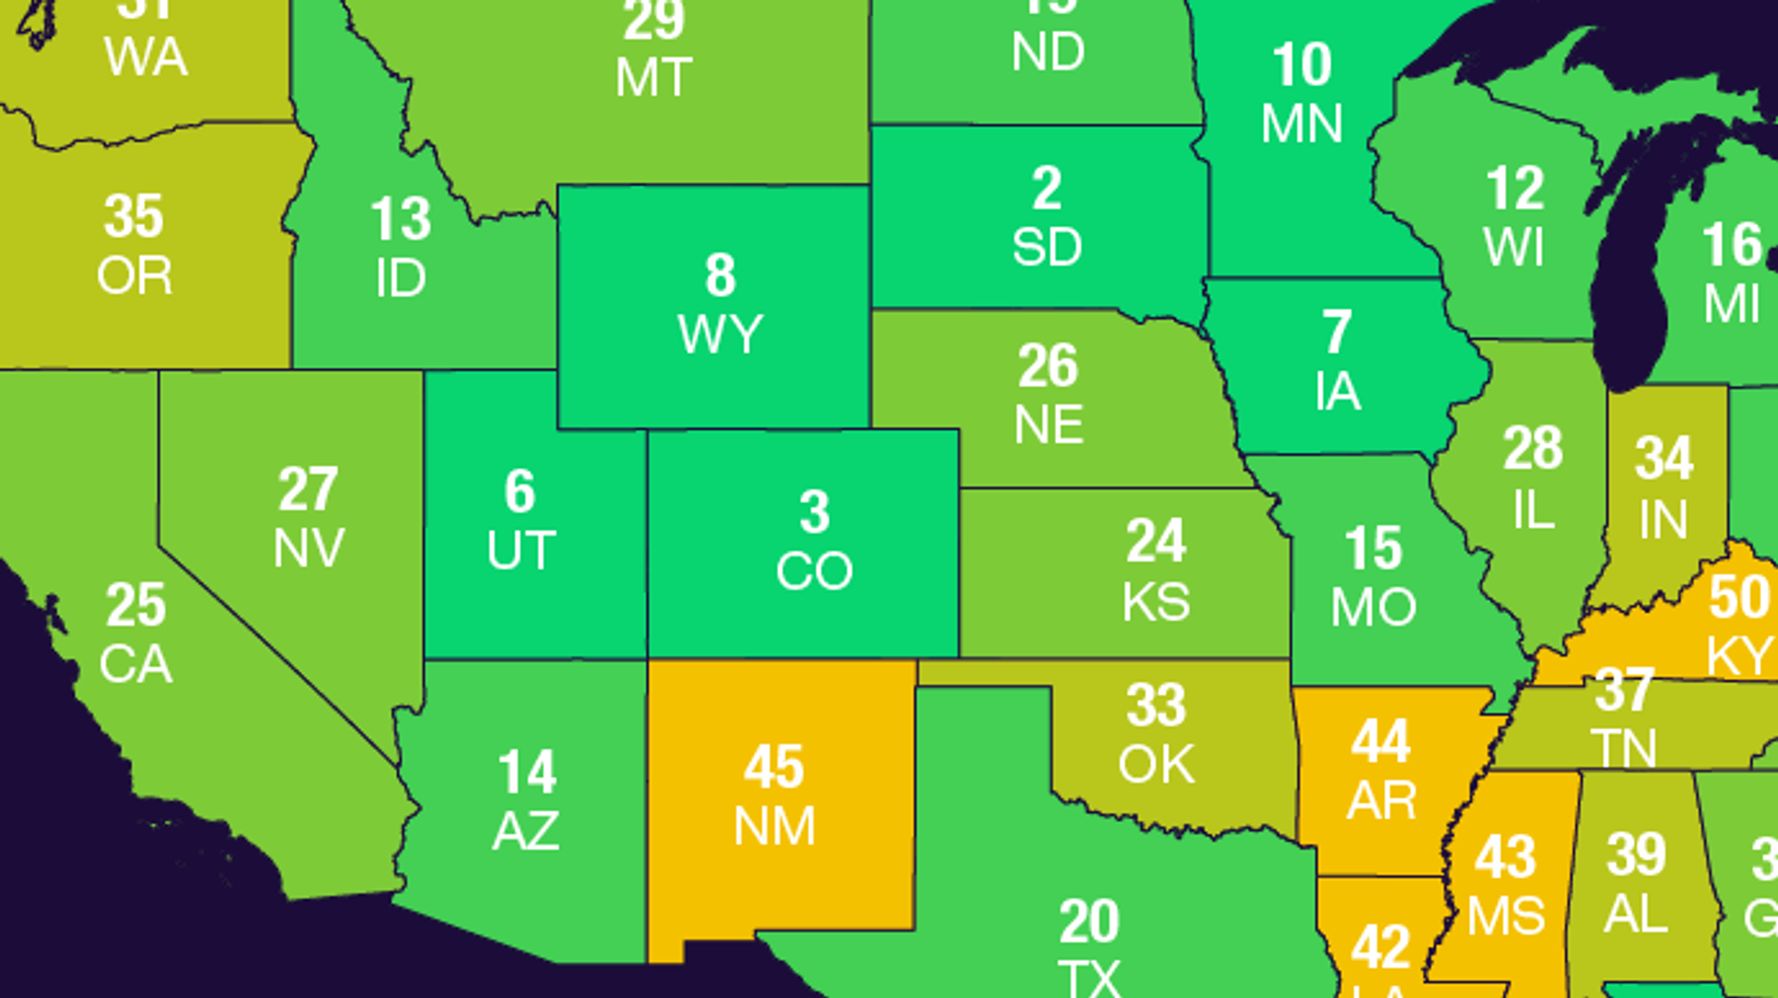 Illinois named one of the worst states for retirement